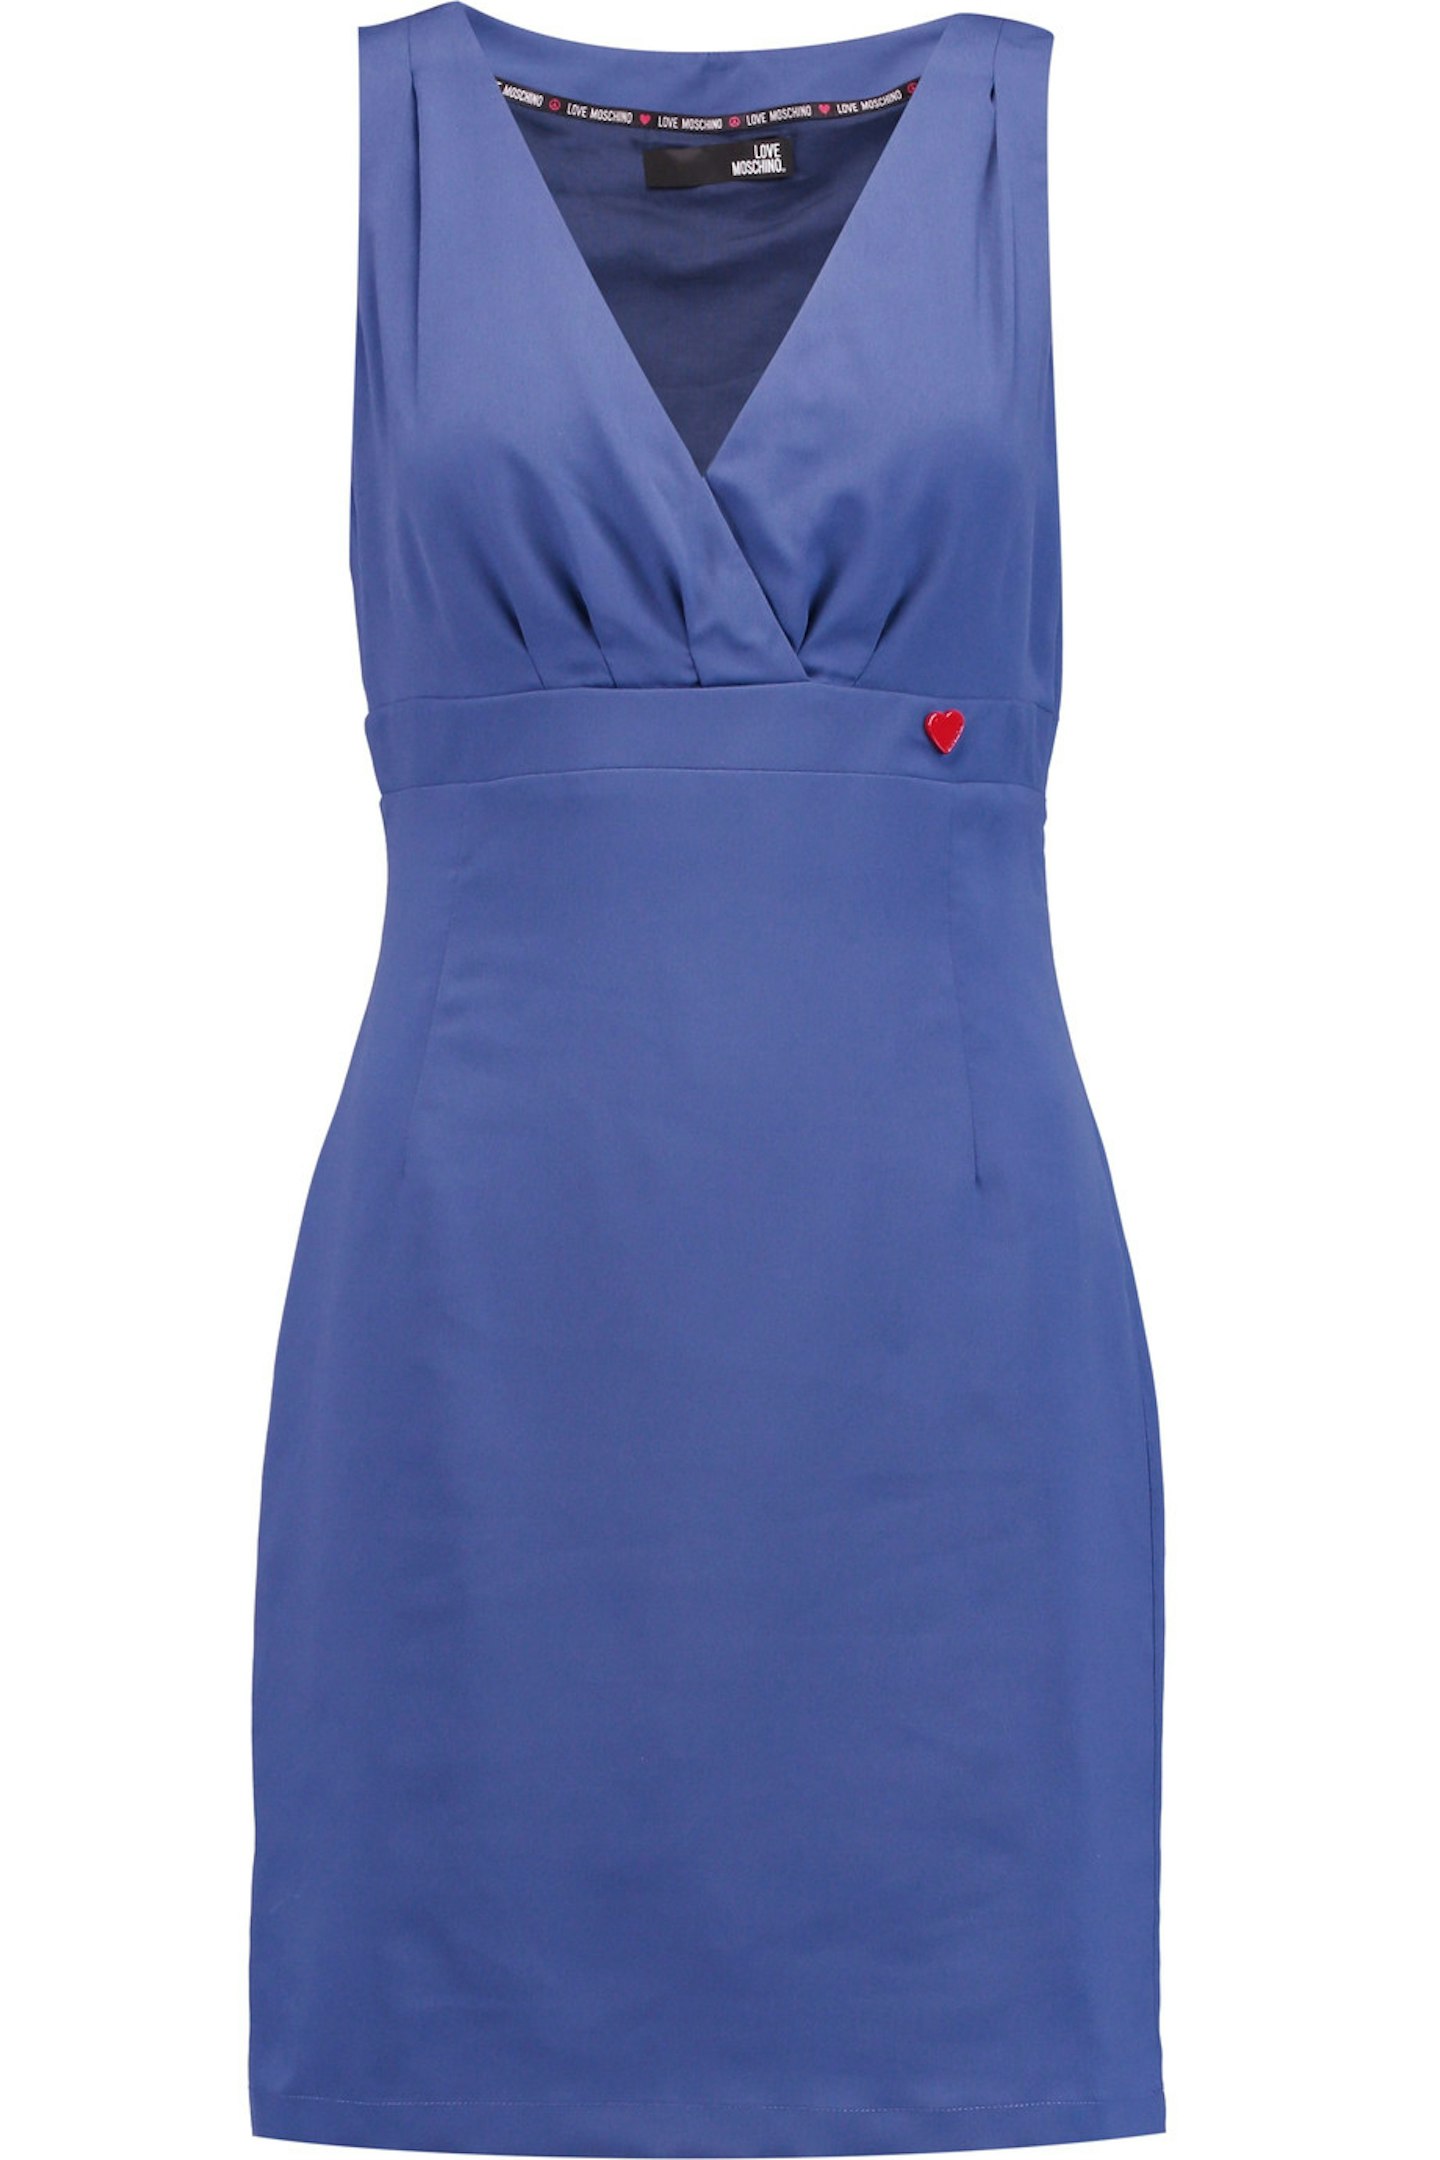 the-outnet-sale-love-moschino-dress-blue